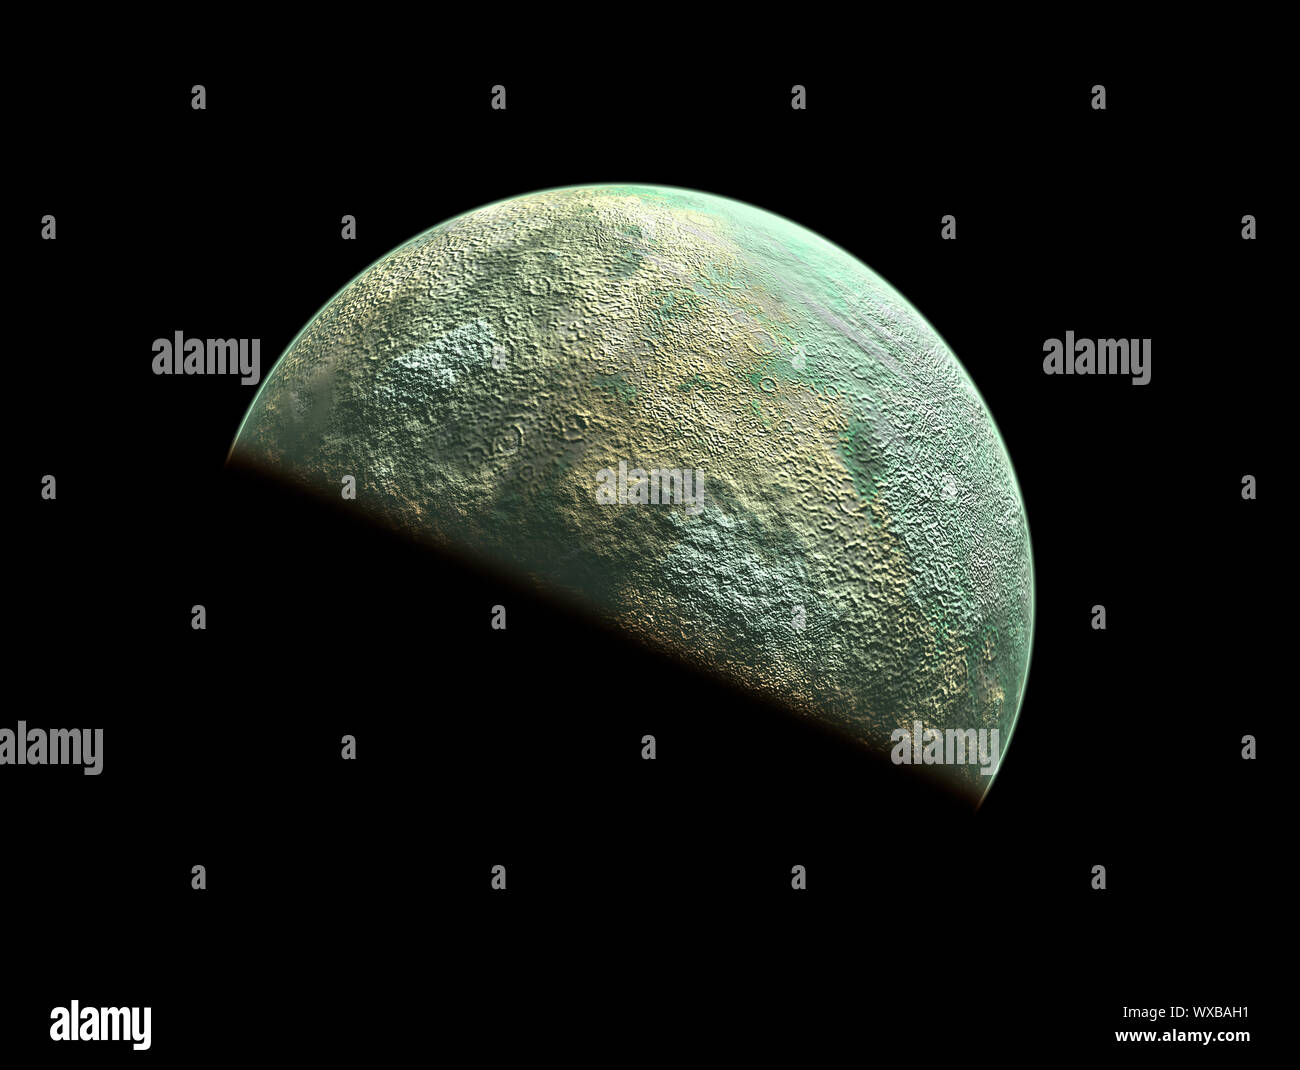 Planet in space with atmosphere and land masses Stock Photo